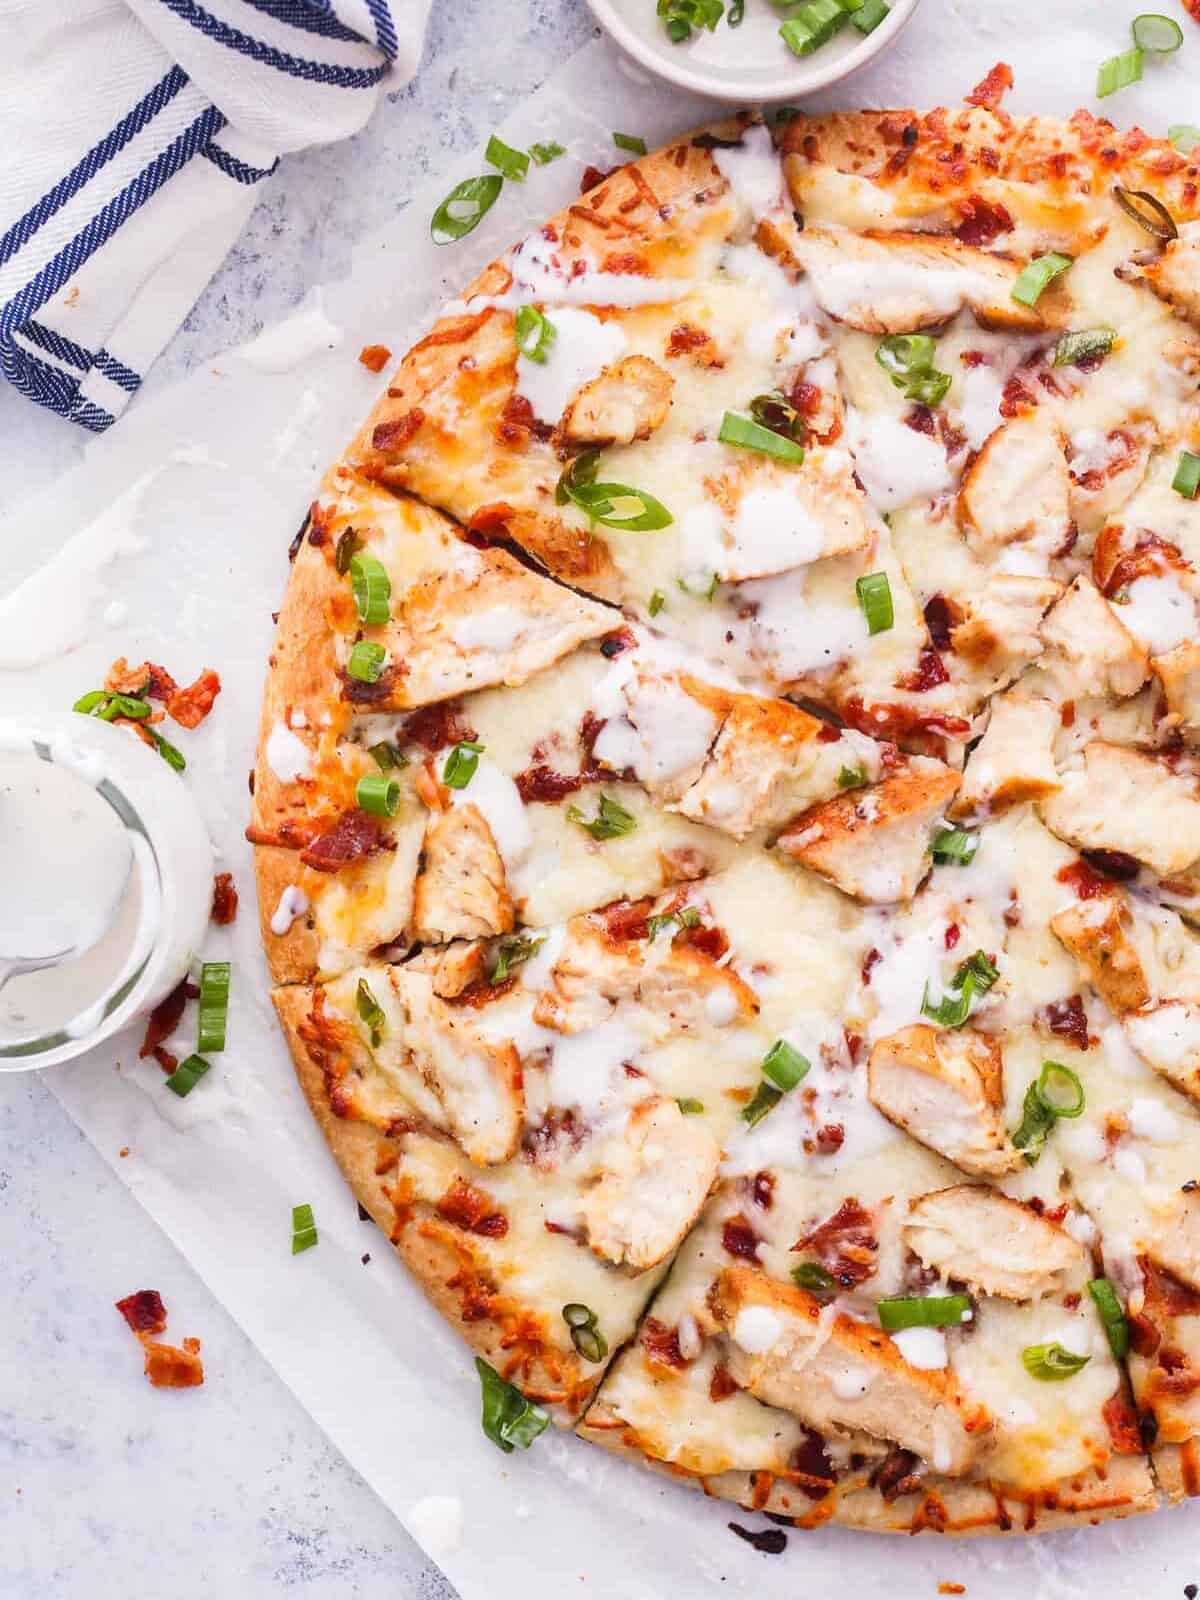 A chicken and cheese pizza on a white plate, topped with bacon and ranch dressing.